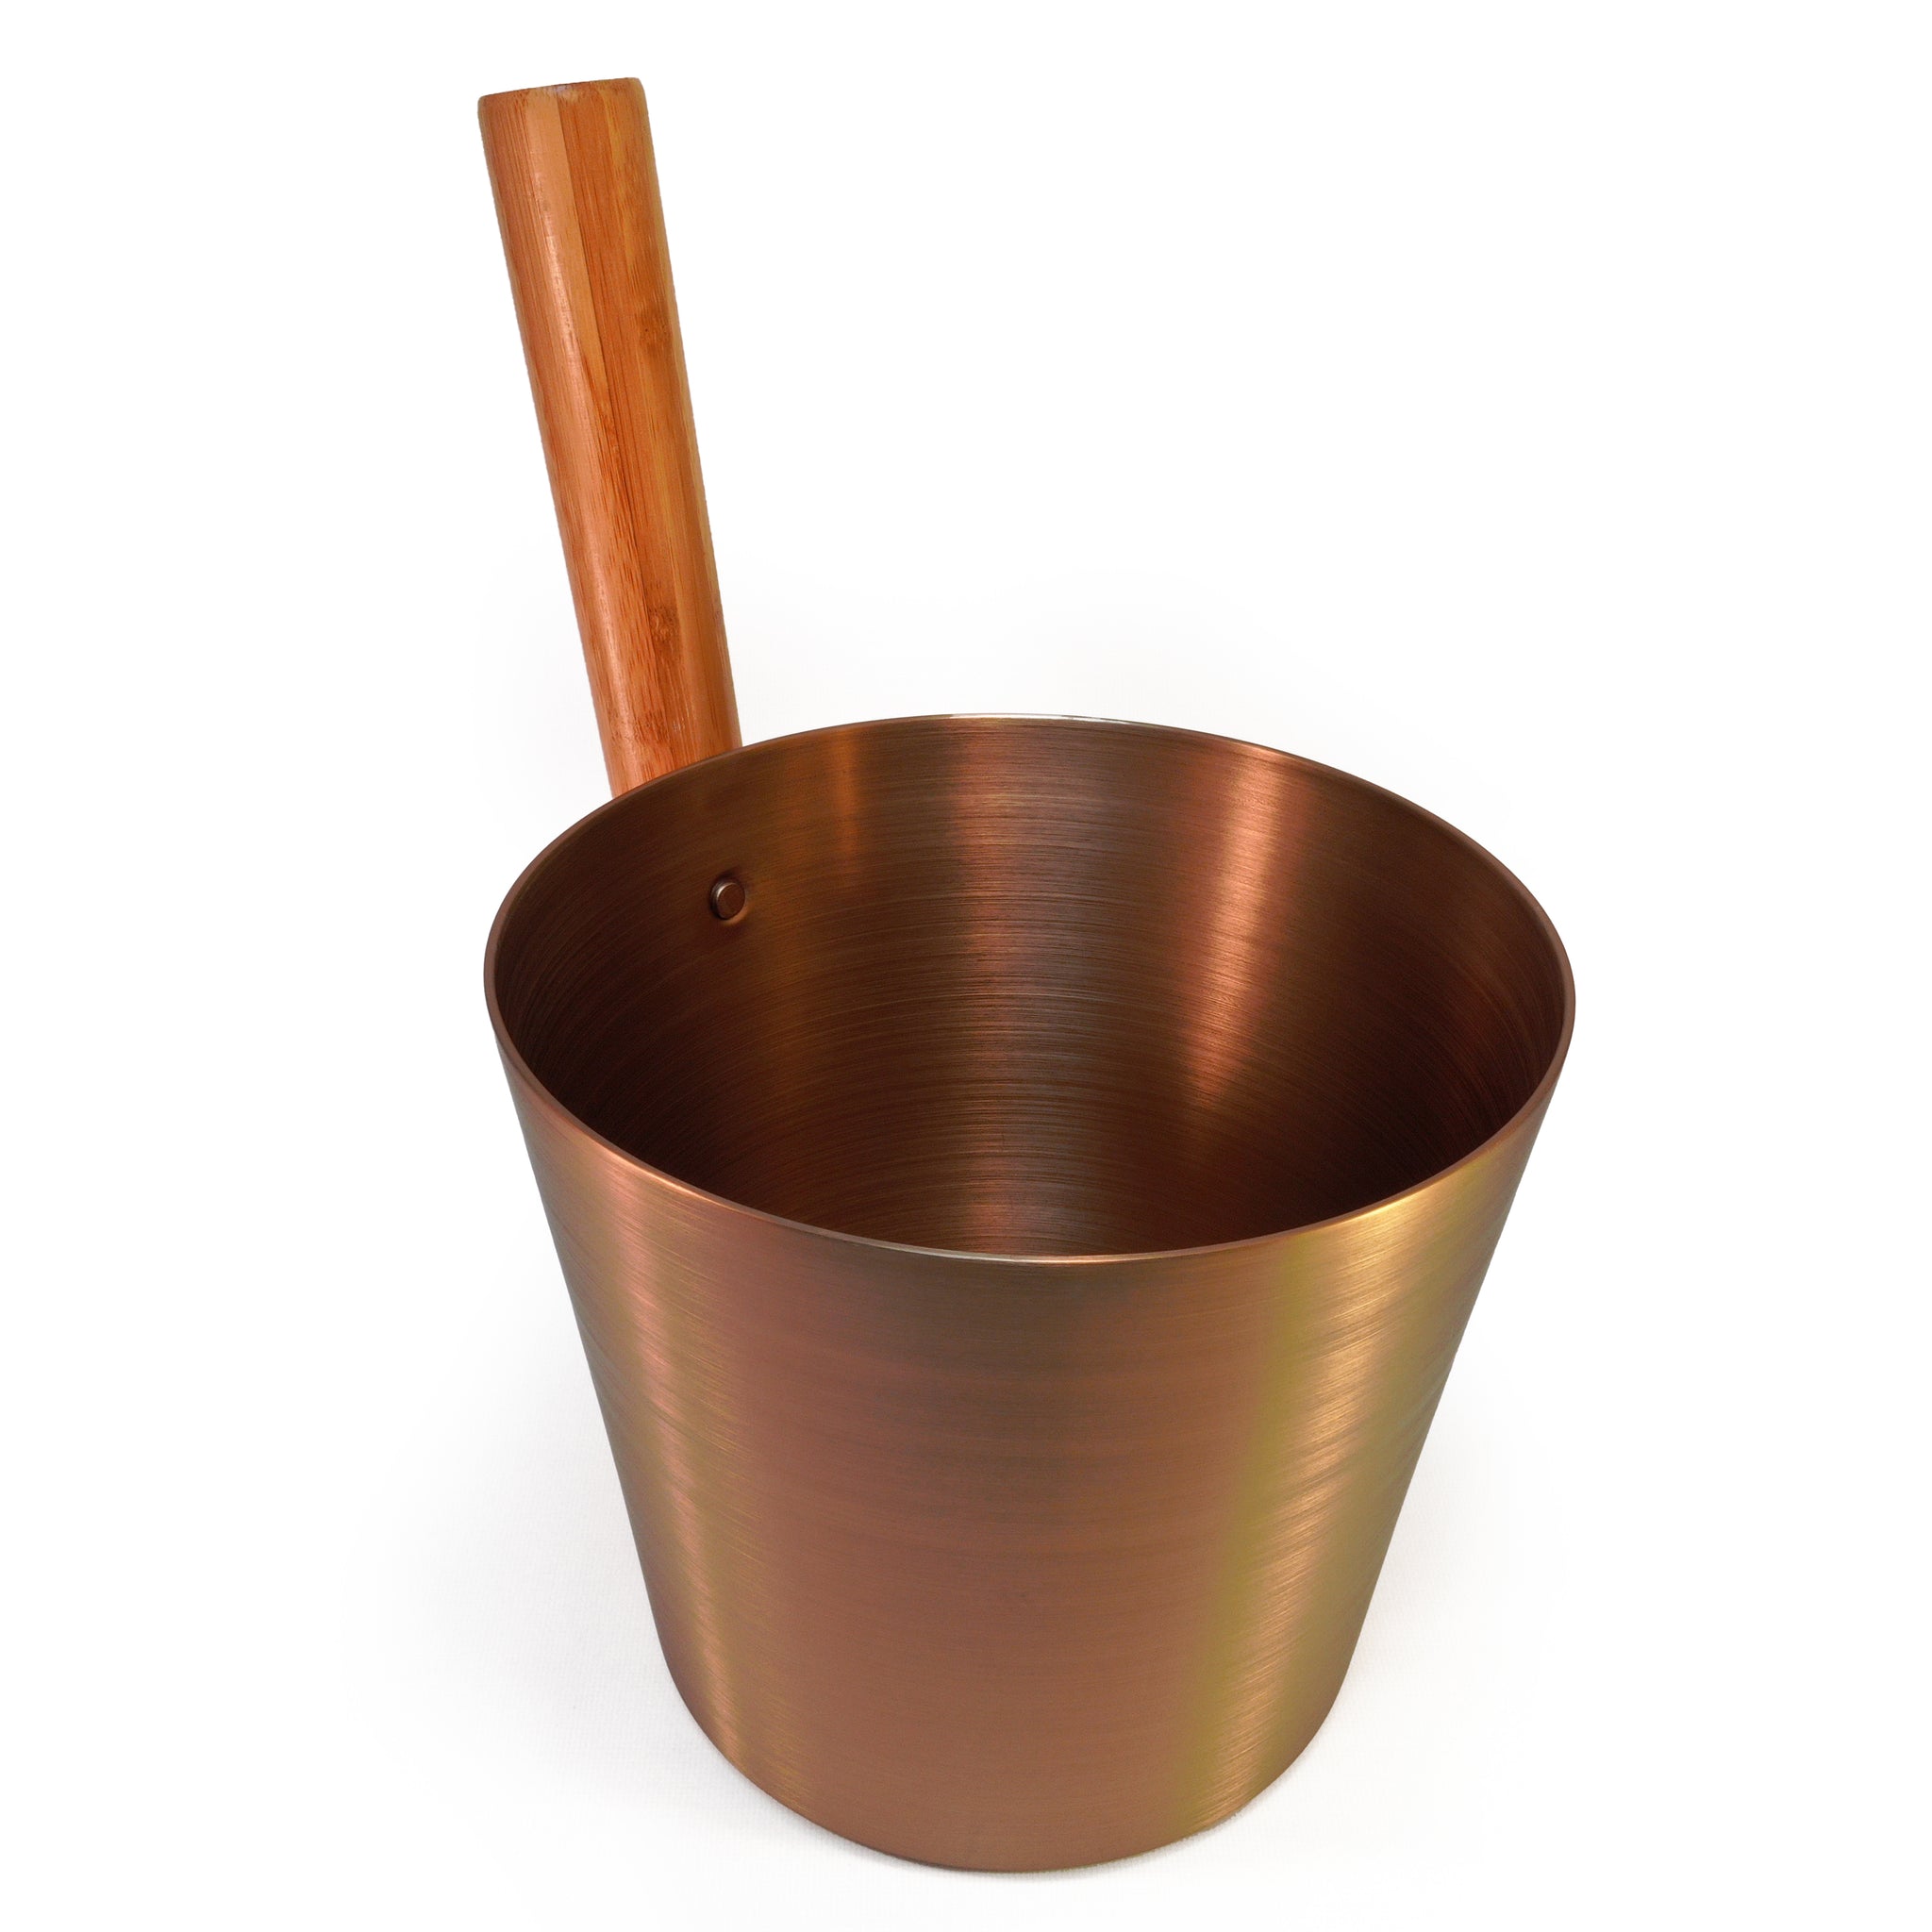 Champagne colored Brushed Aluminum Sauna bucket with straight wooden handle on white background